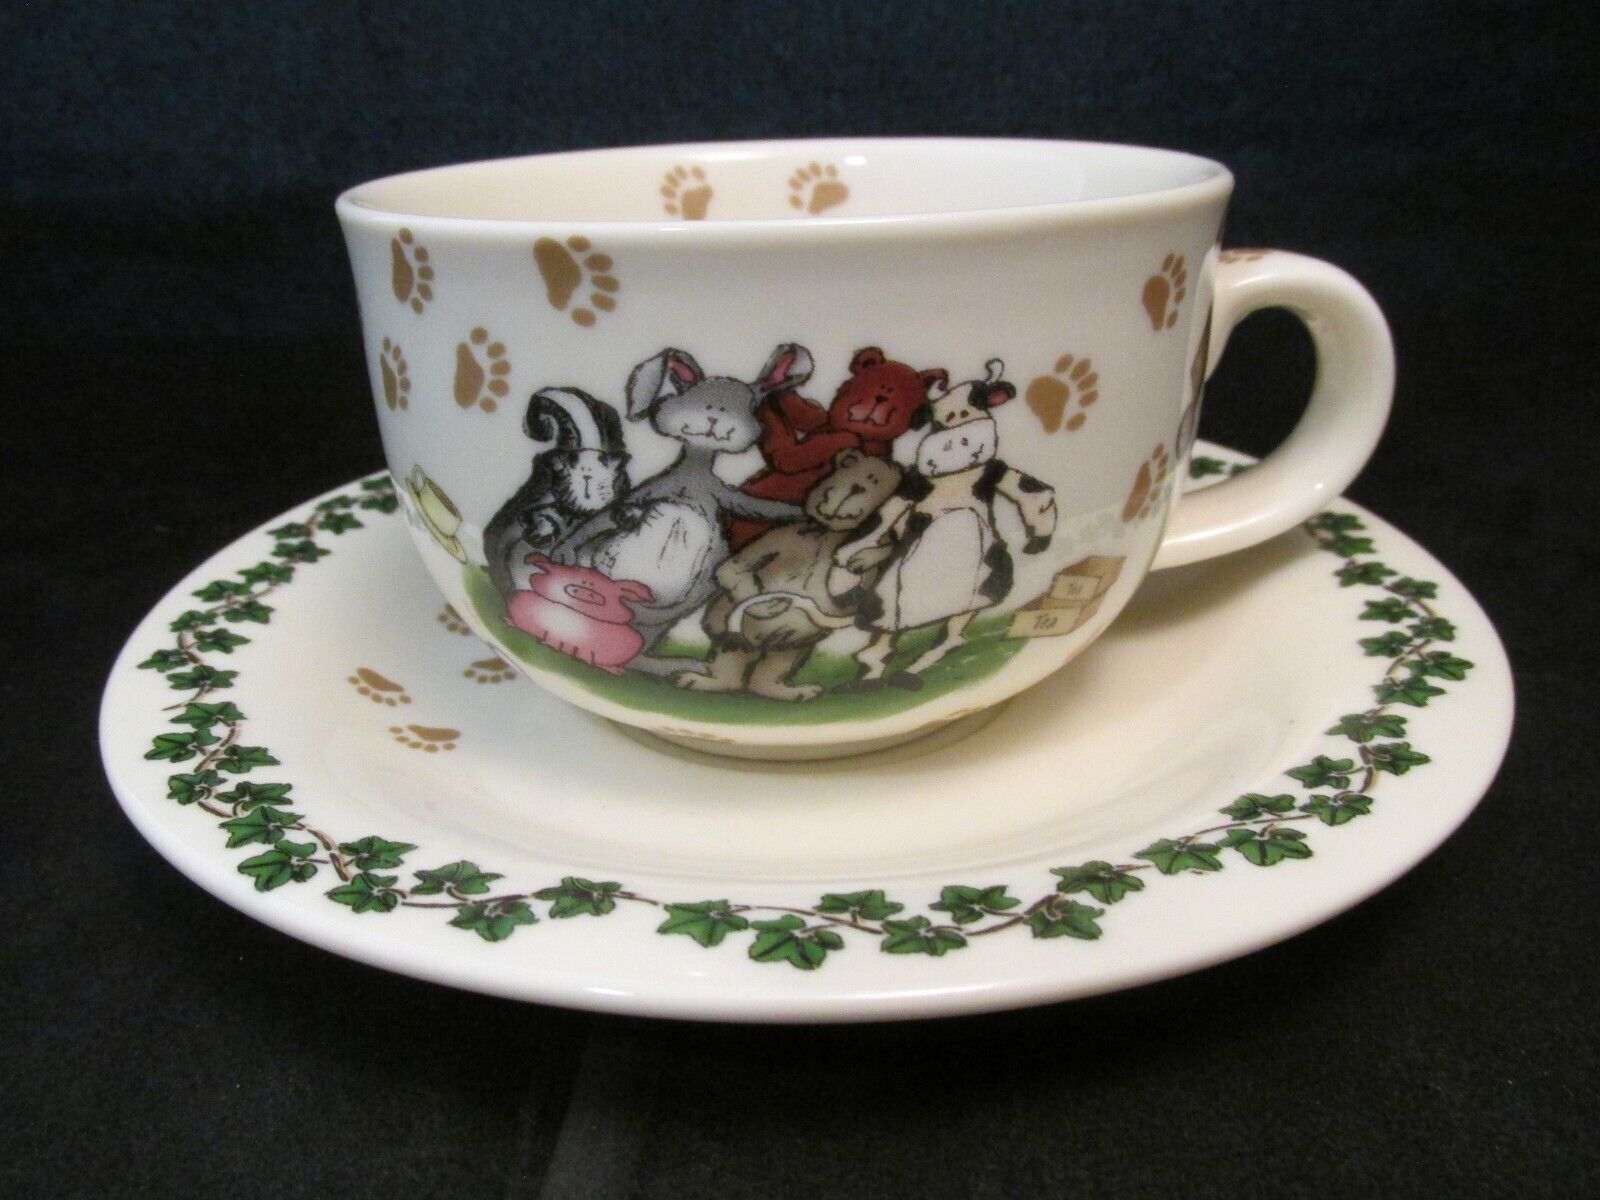 Boyds Bears Ceramic Cup & Saucer 2004 Celebrating 25 Years Tea Cup Coffee Cup